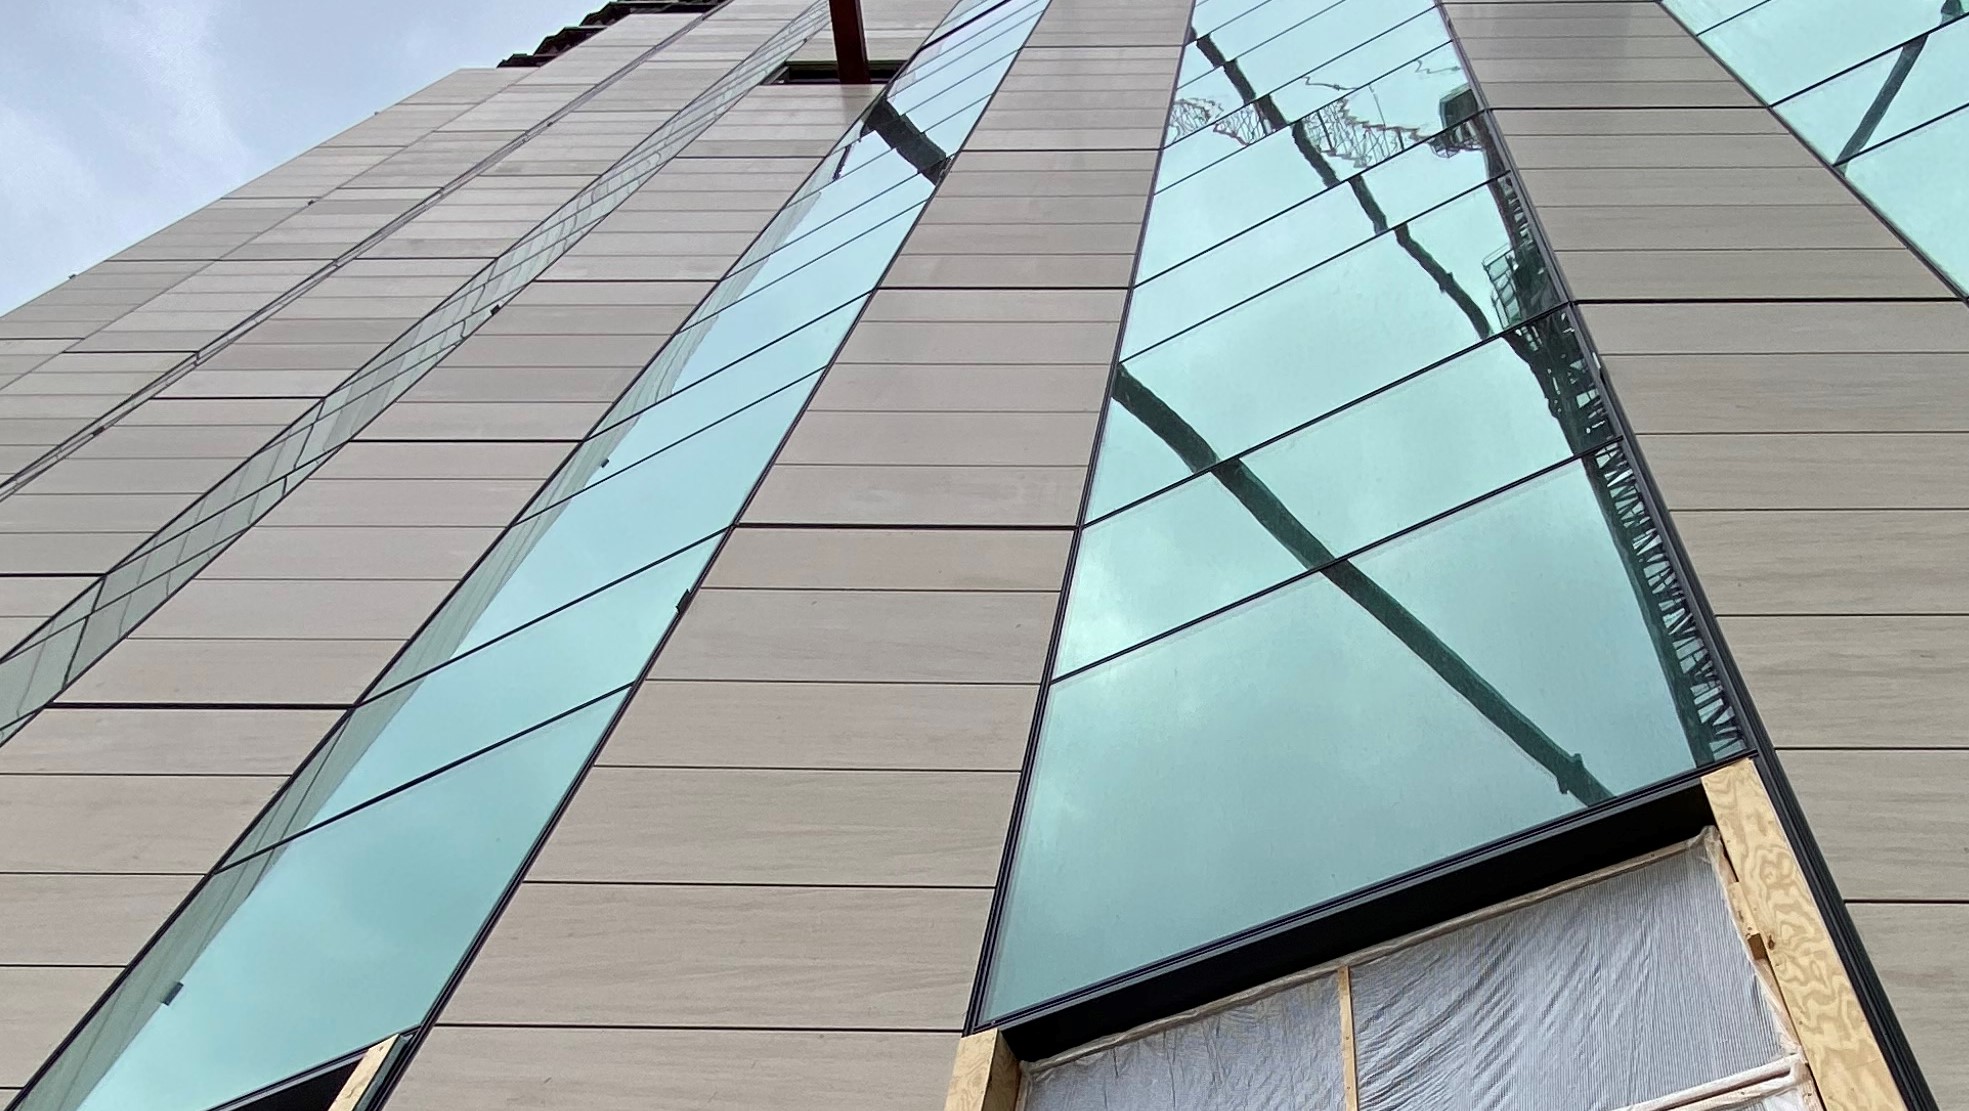 Prefabricated panels clad the exterior of the OSU Tower